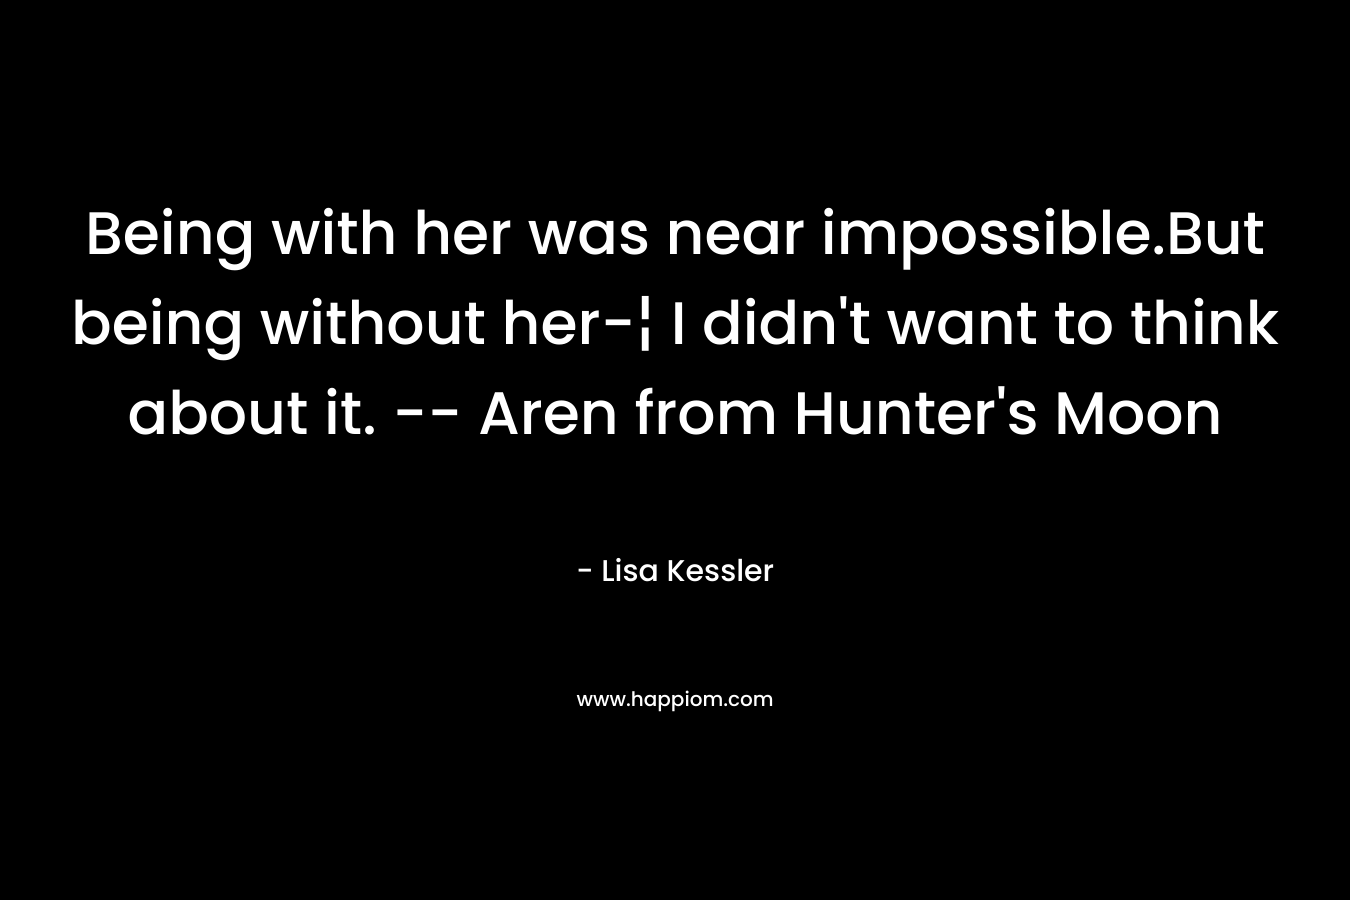 Being with her was near impossible.But being without her-¦ I didn't want to think about it. -- Aren from Hunter's Moon